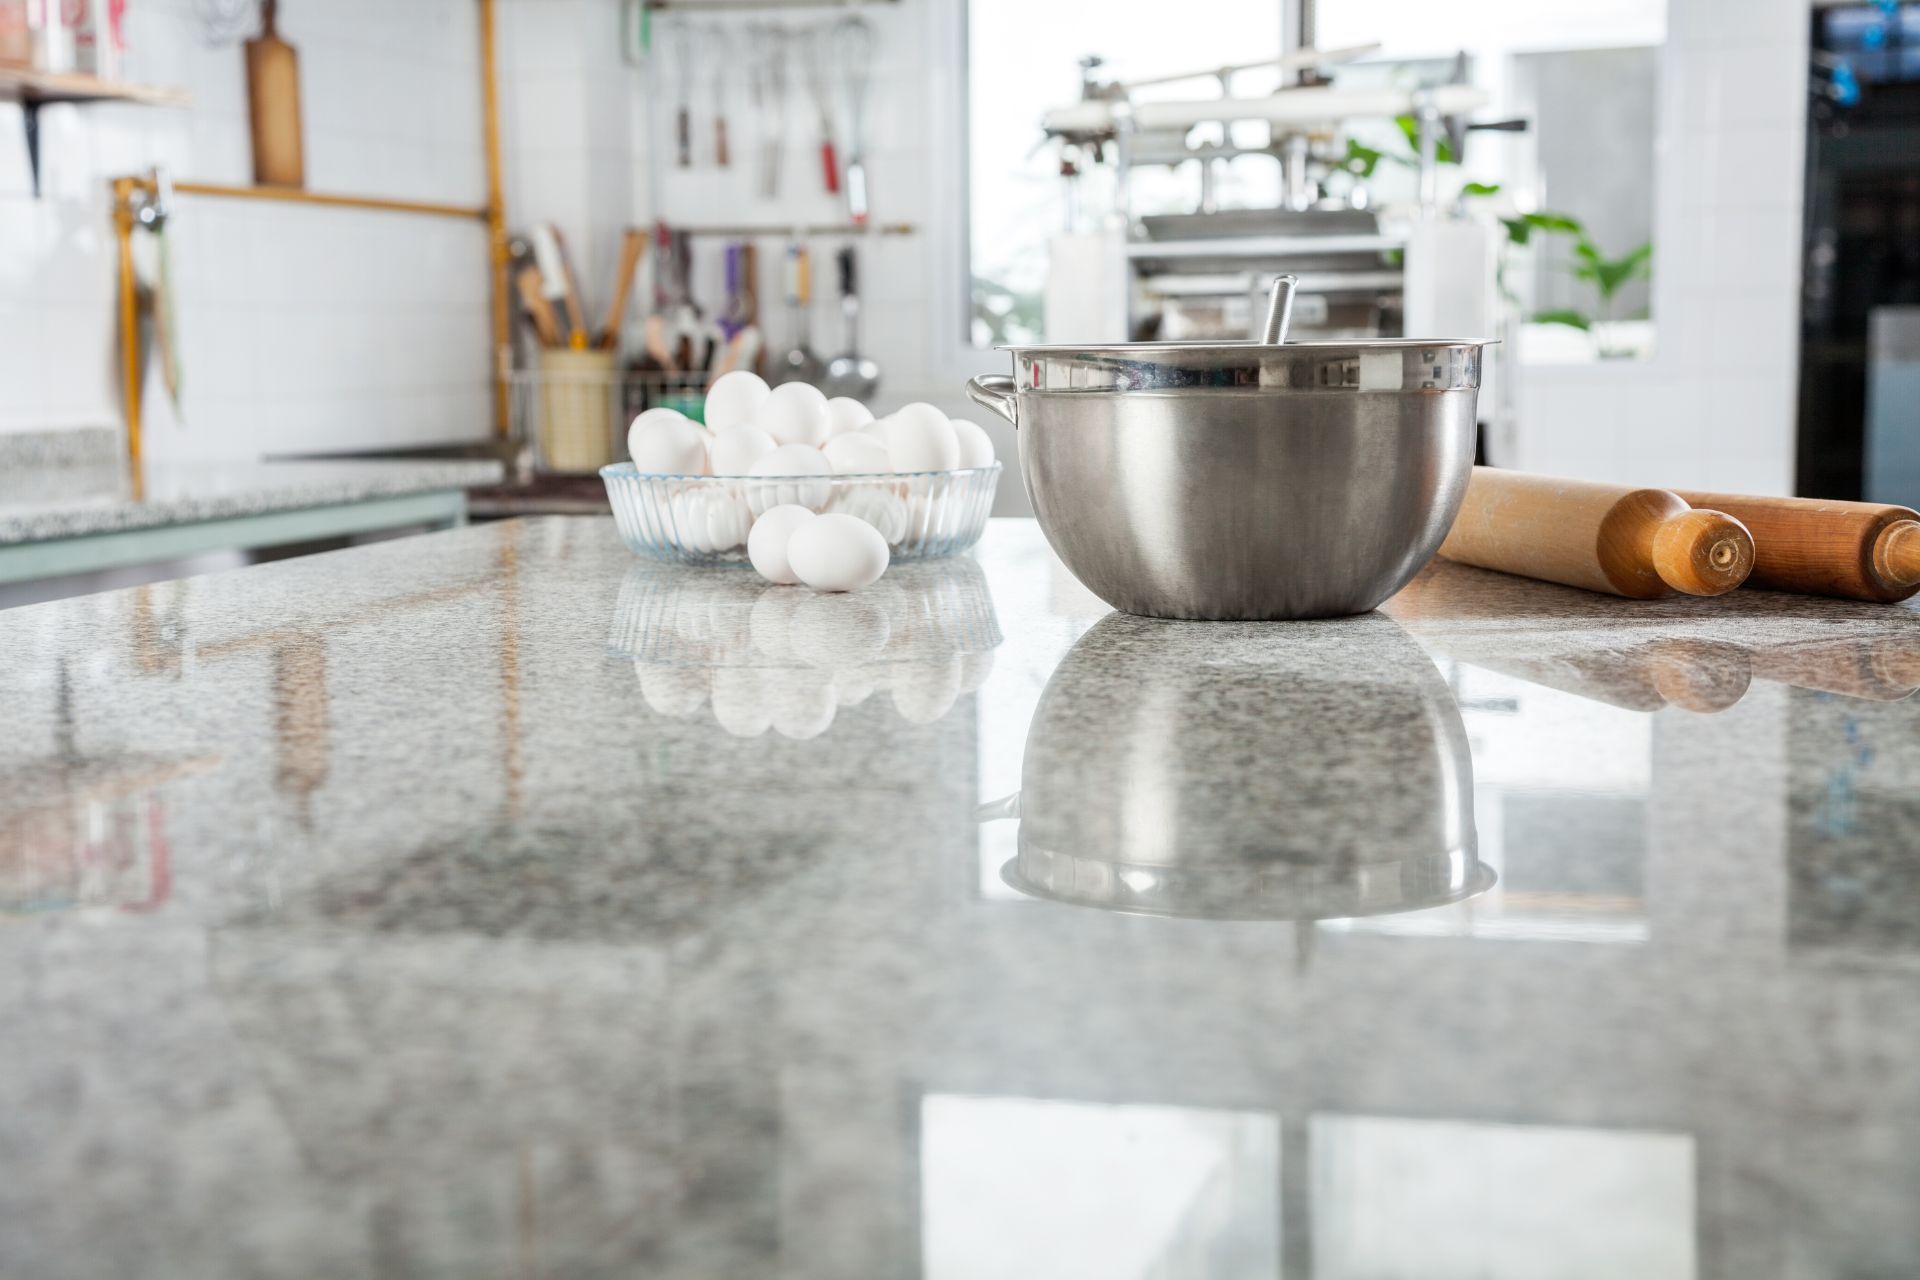 In Athens, GA, a modern kitchen displays a polished granite countertop reflecting a stainless steel mixing bowl beside a basket of white eggs and a wooden rolling pin. Cooking utensils hang in the background, suggesting a homey yet professional setting for culinary activities.